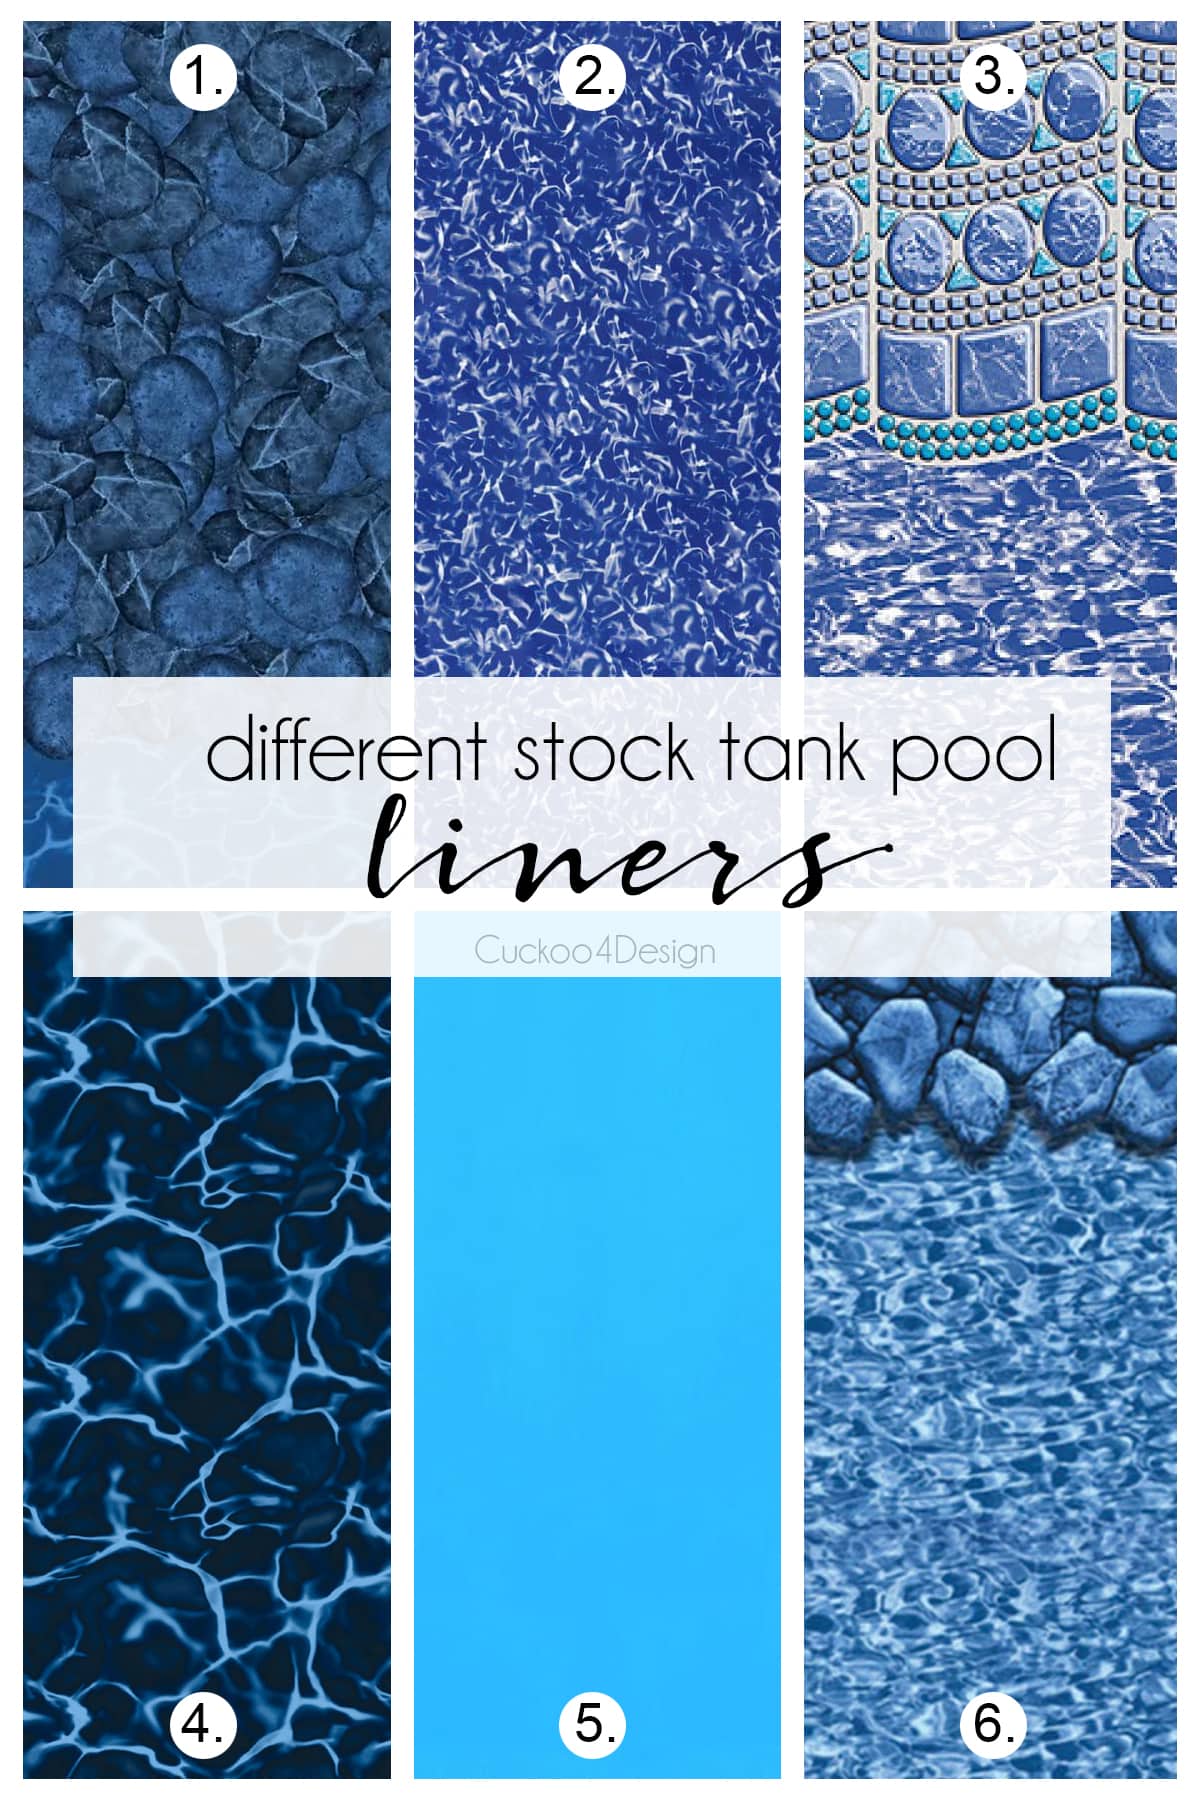 different stock tank pool liner options